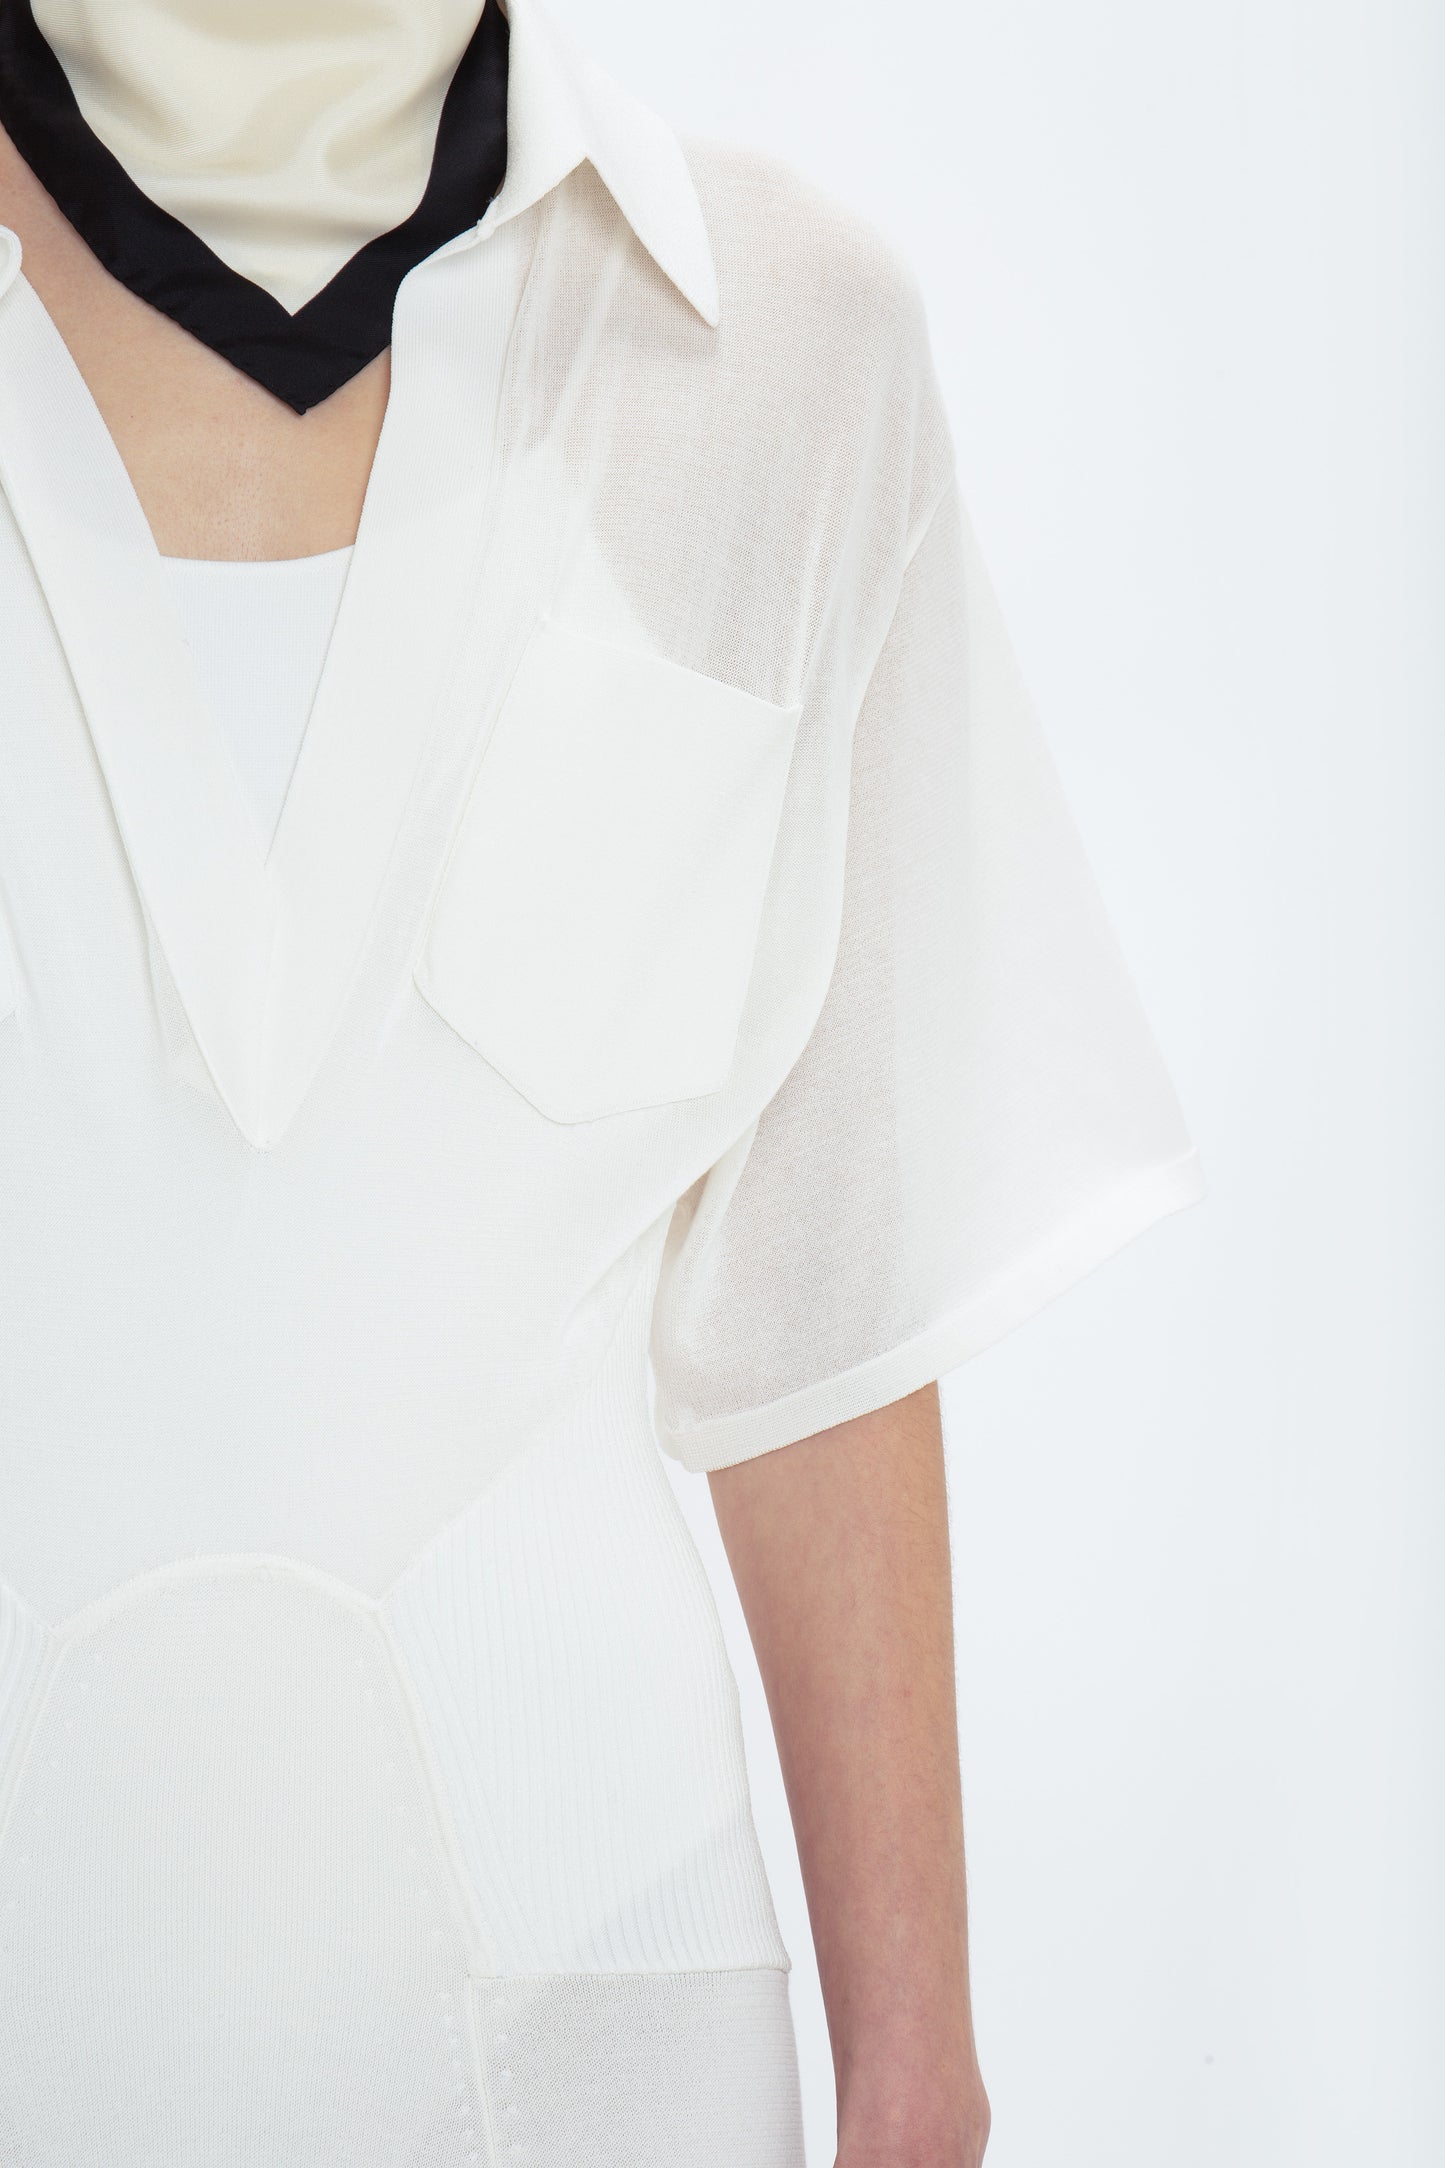 Close-up of a person wearing a Panelled Knit Dress In White by Victoria Beckham, exuding relaxed glamour. The image focuses on the torso, with no face visible.